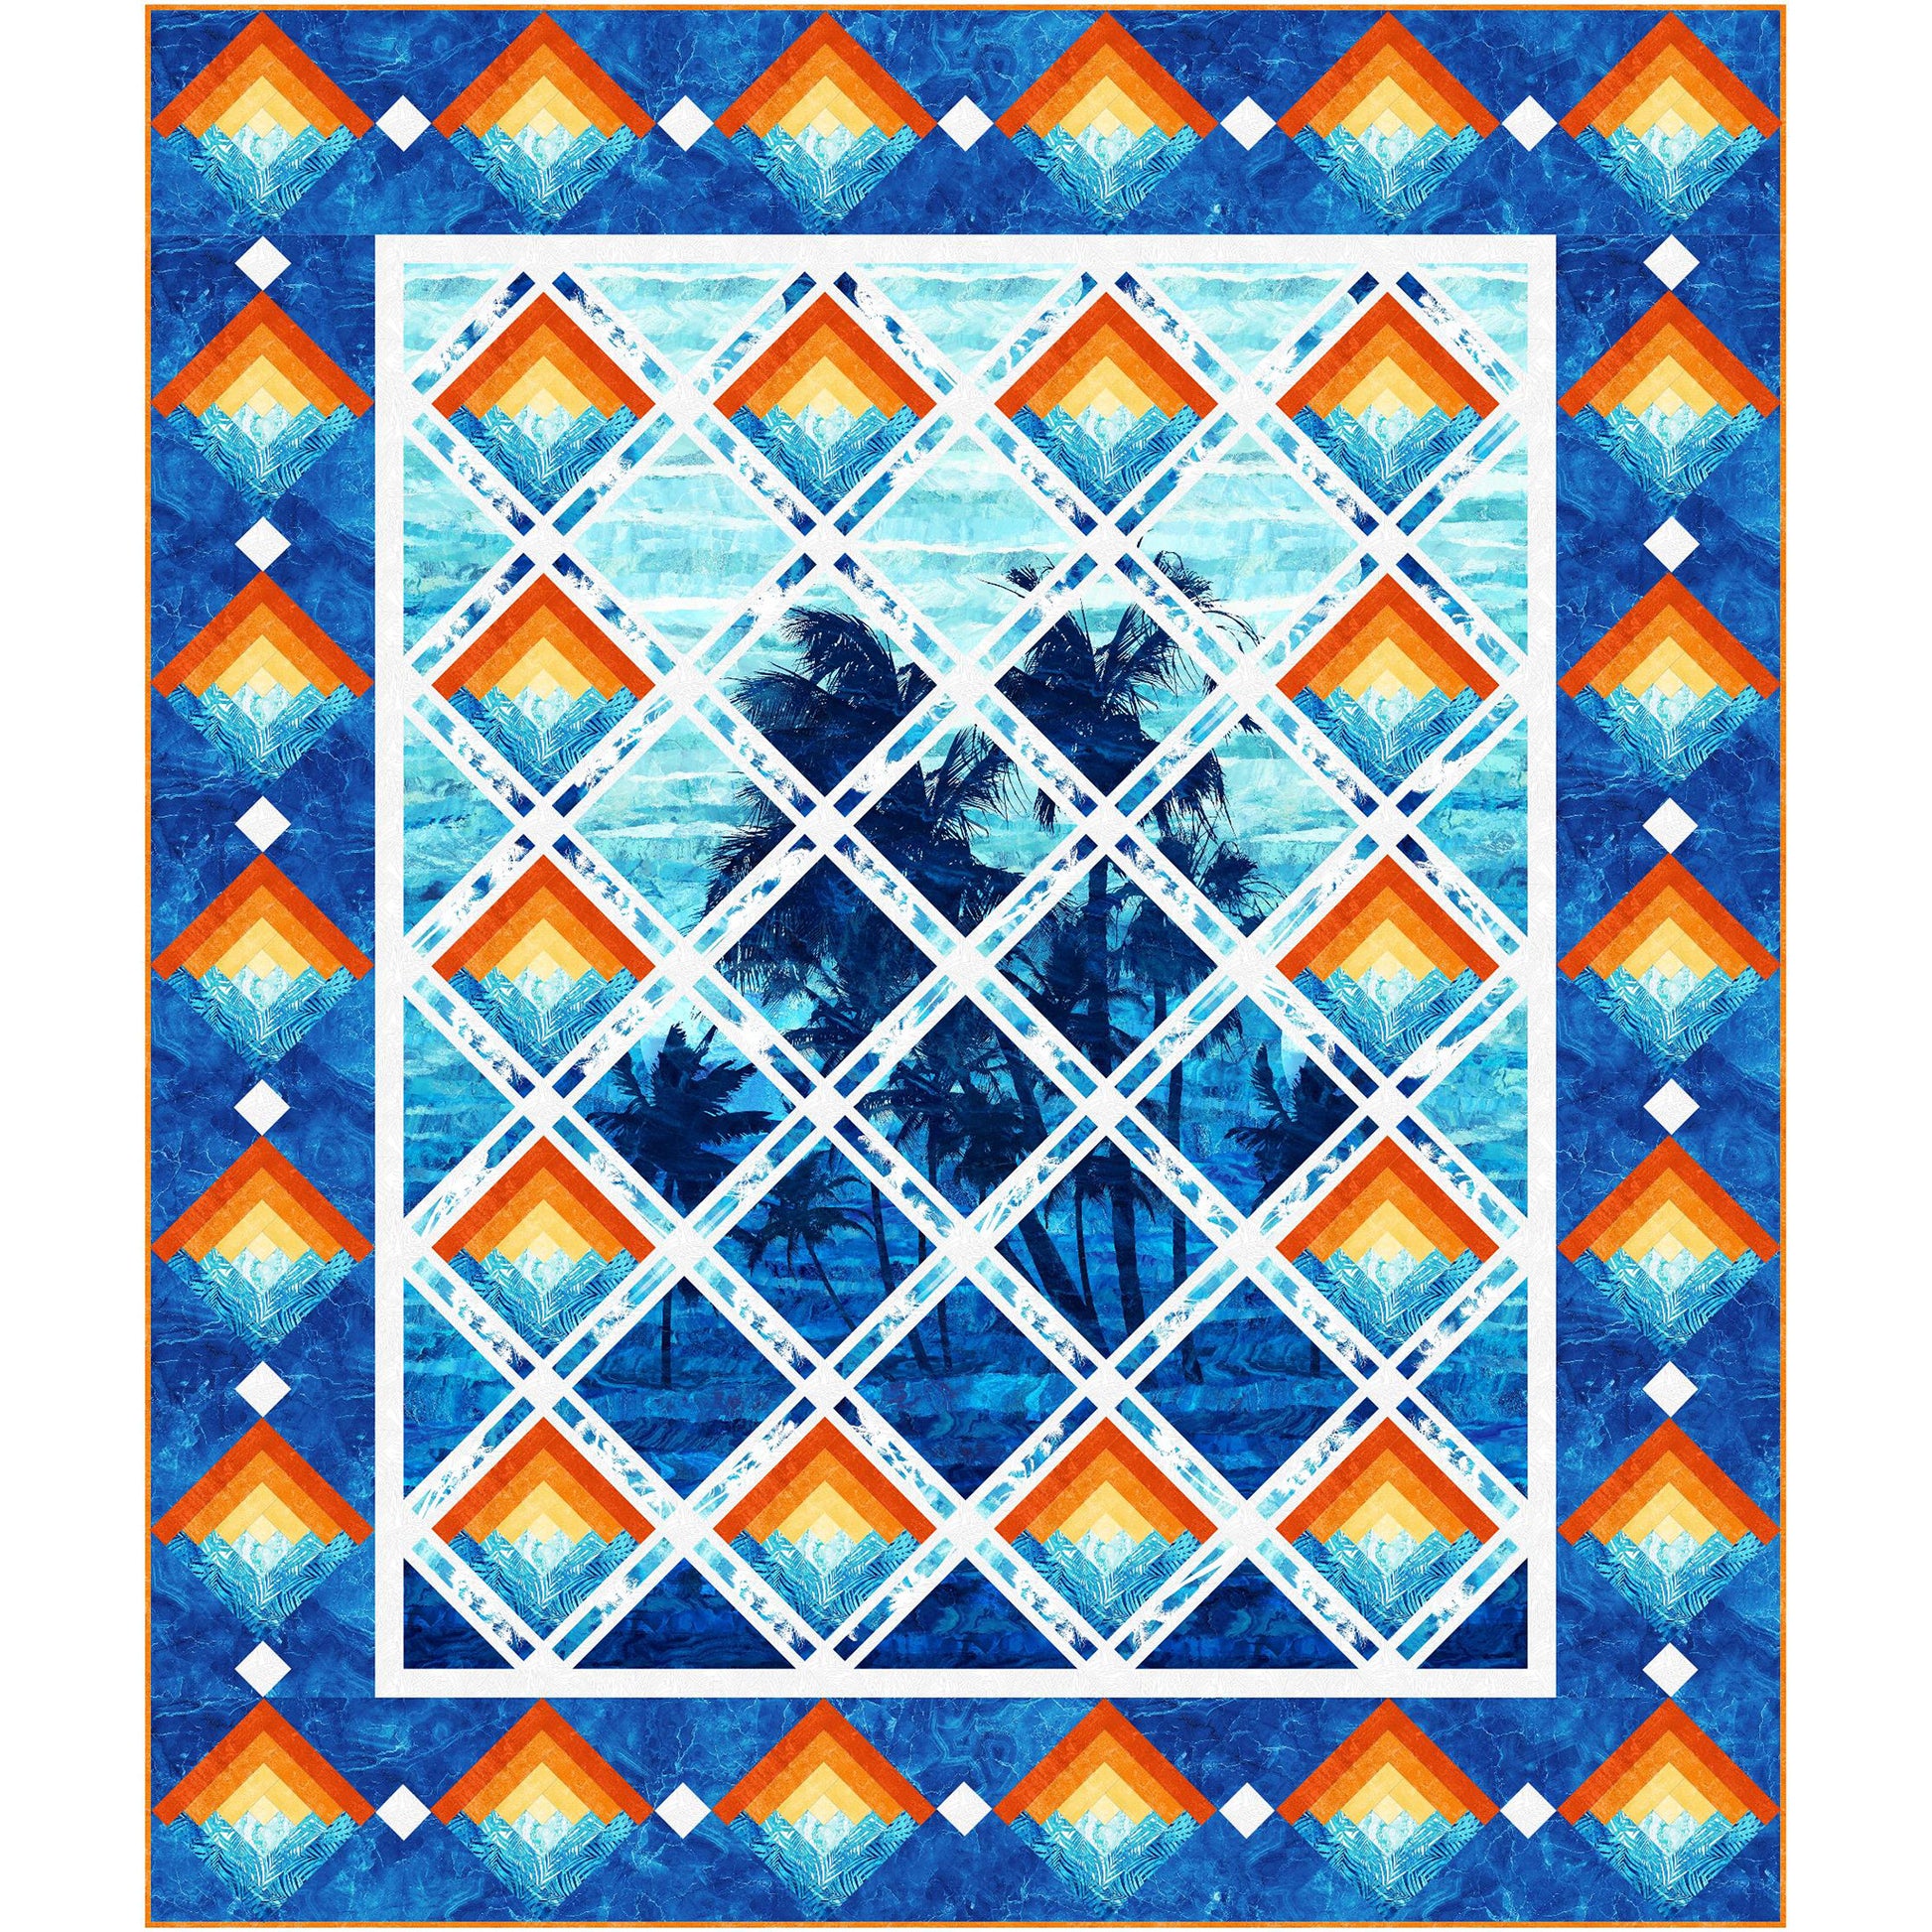 Serene quilt showcasing palm trees against a serene blue sky cut up so looks like seen through diamond panes with sunset log cabin blocks on the sides. In shades of blue with orange yellow for sunset look on log cabin blocks.